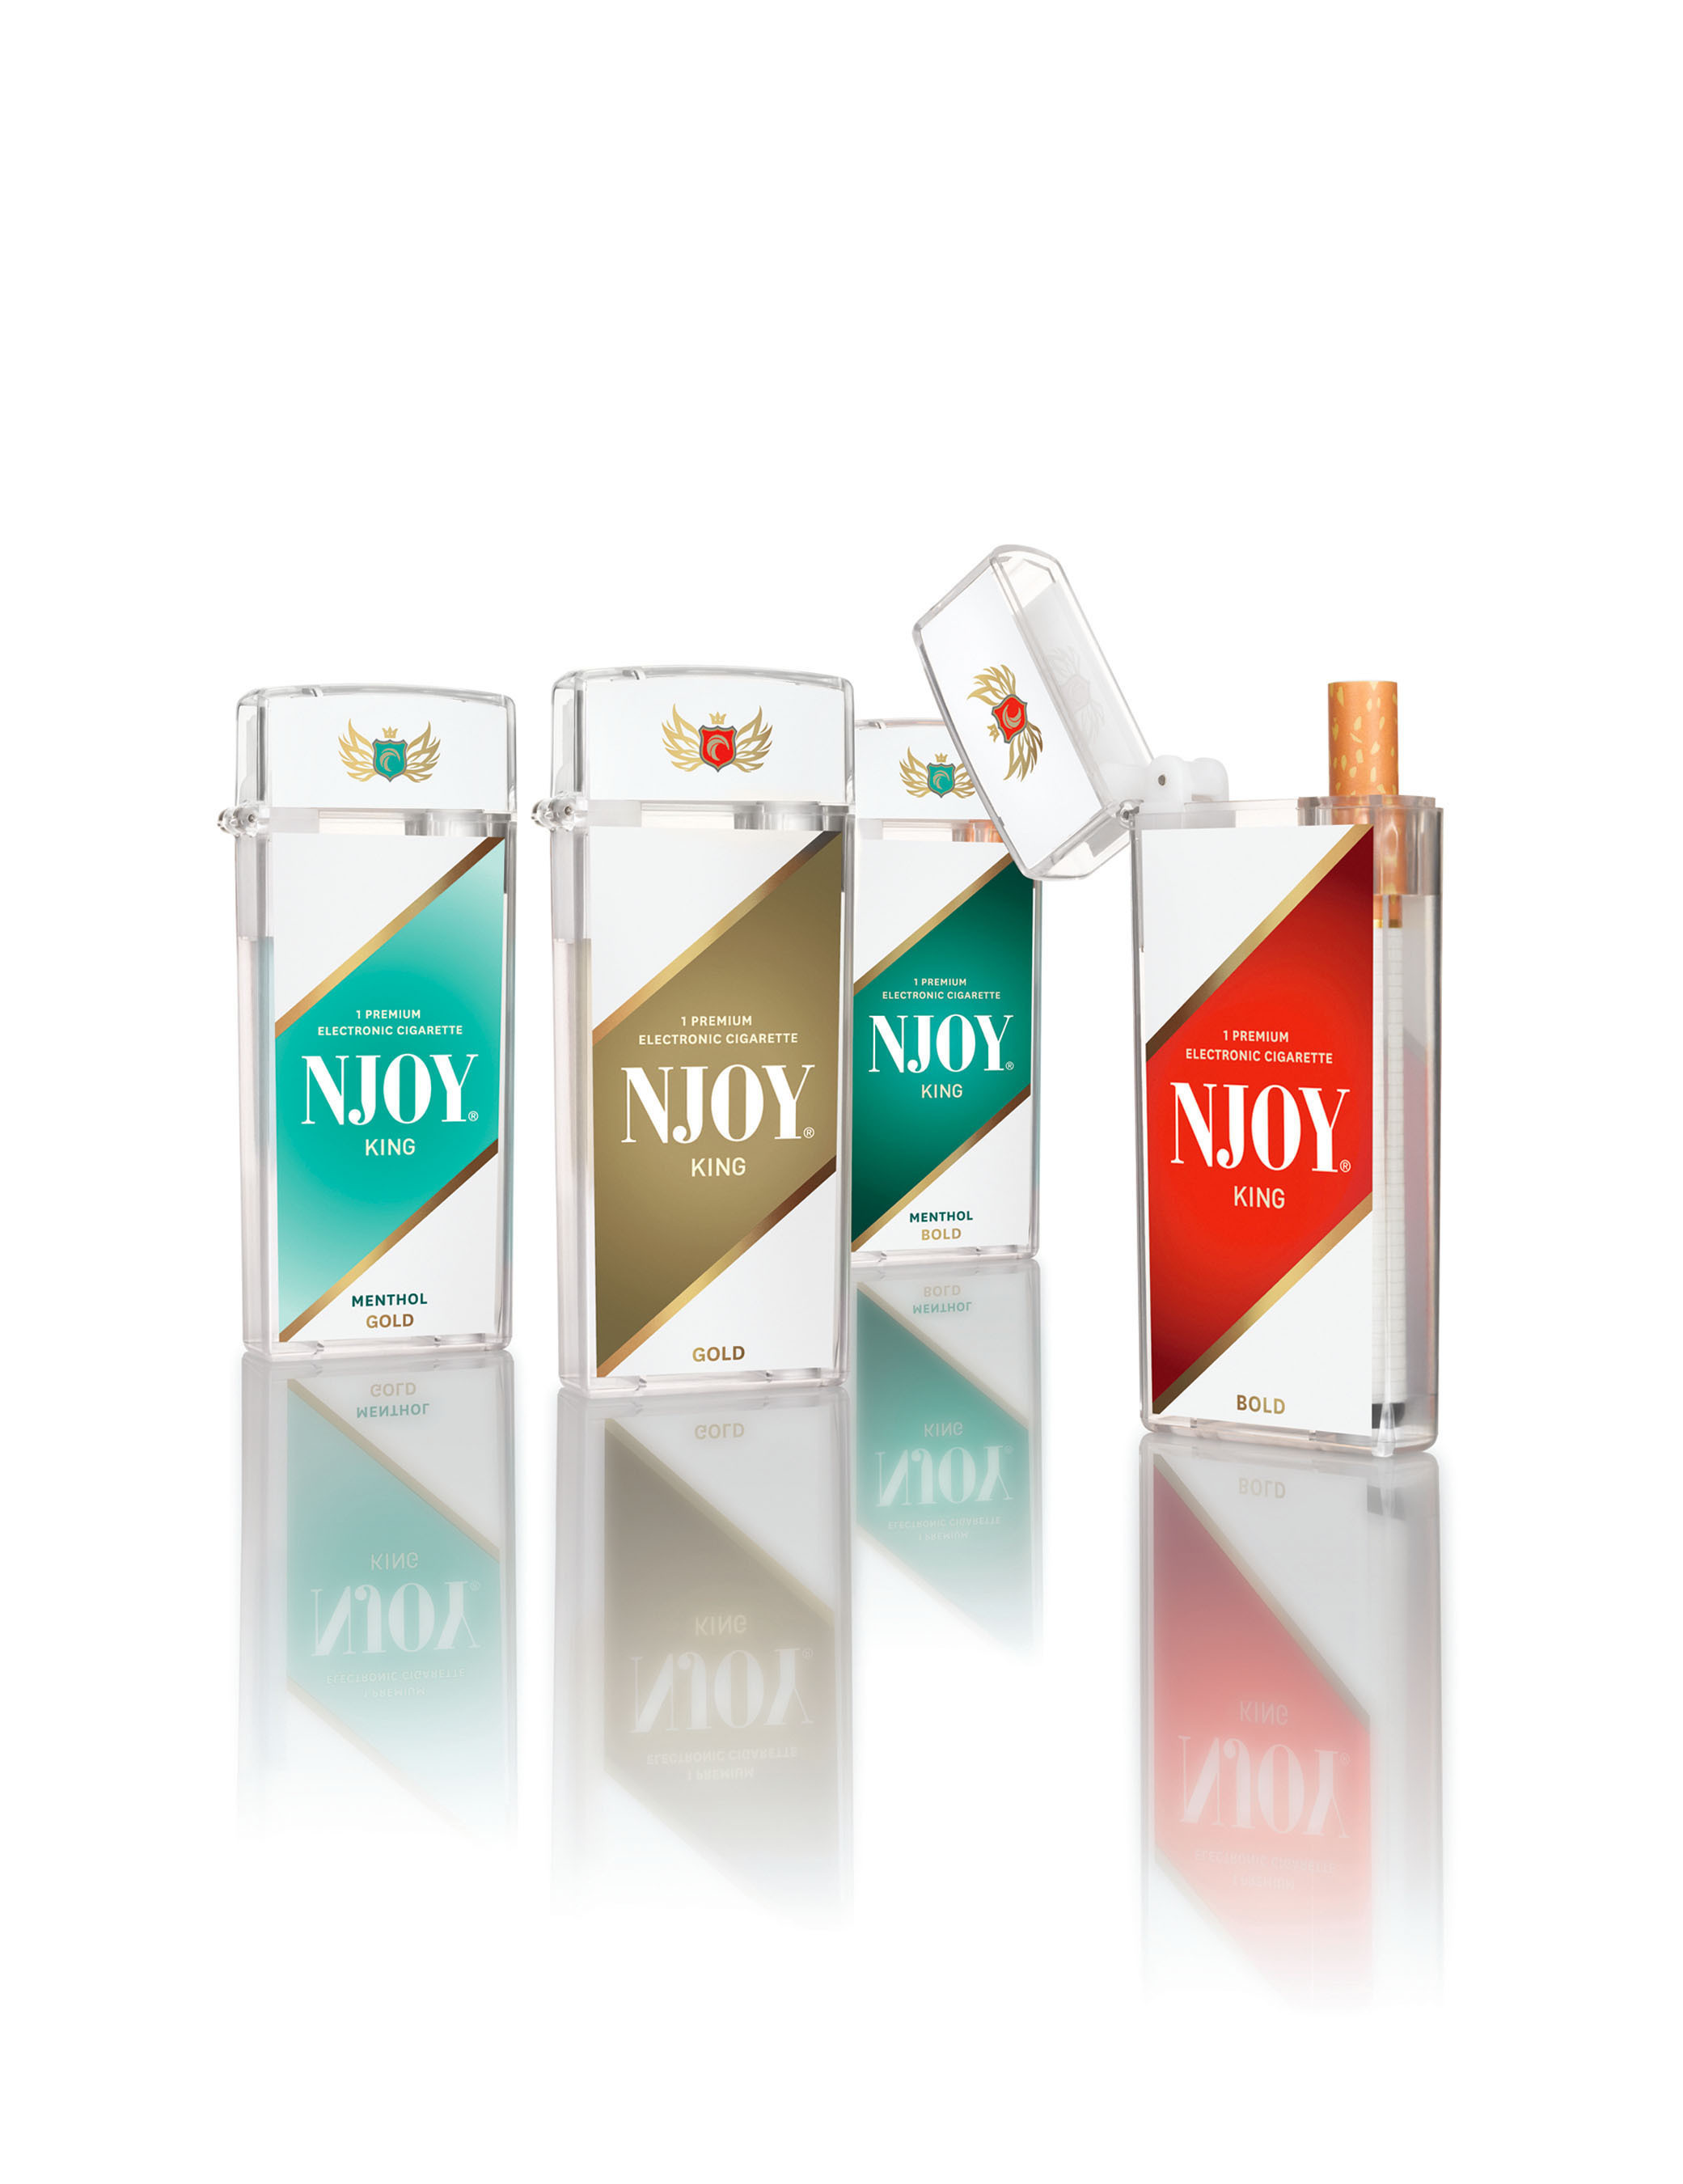 NJOY Introduces Revolutionary Electronic Cigarettes: The NJOY Kings